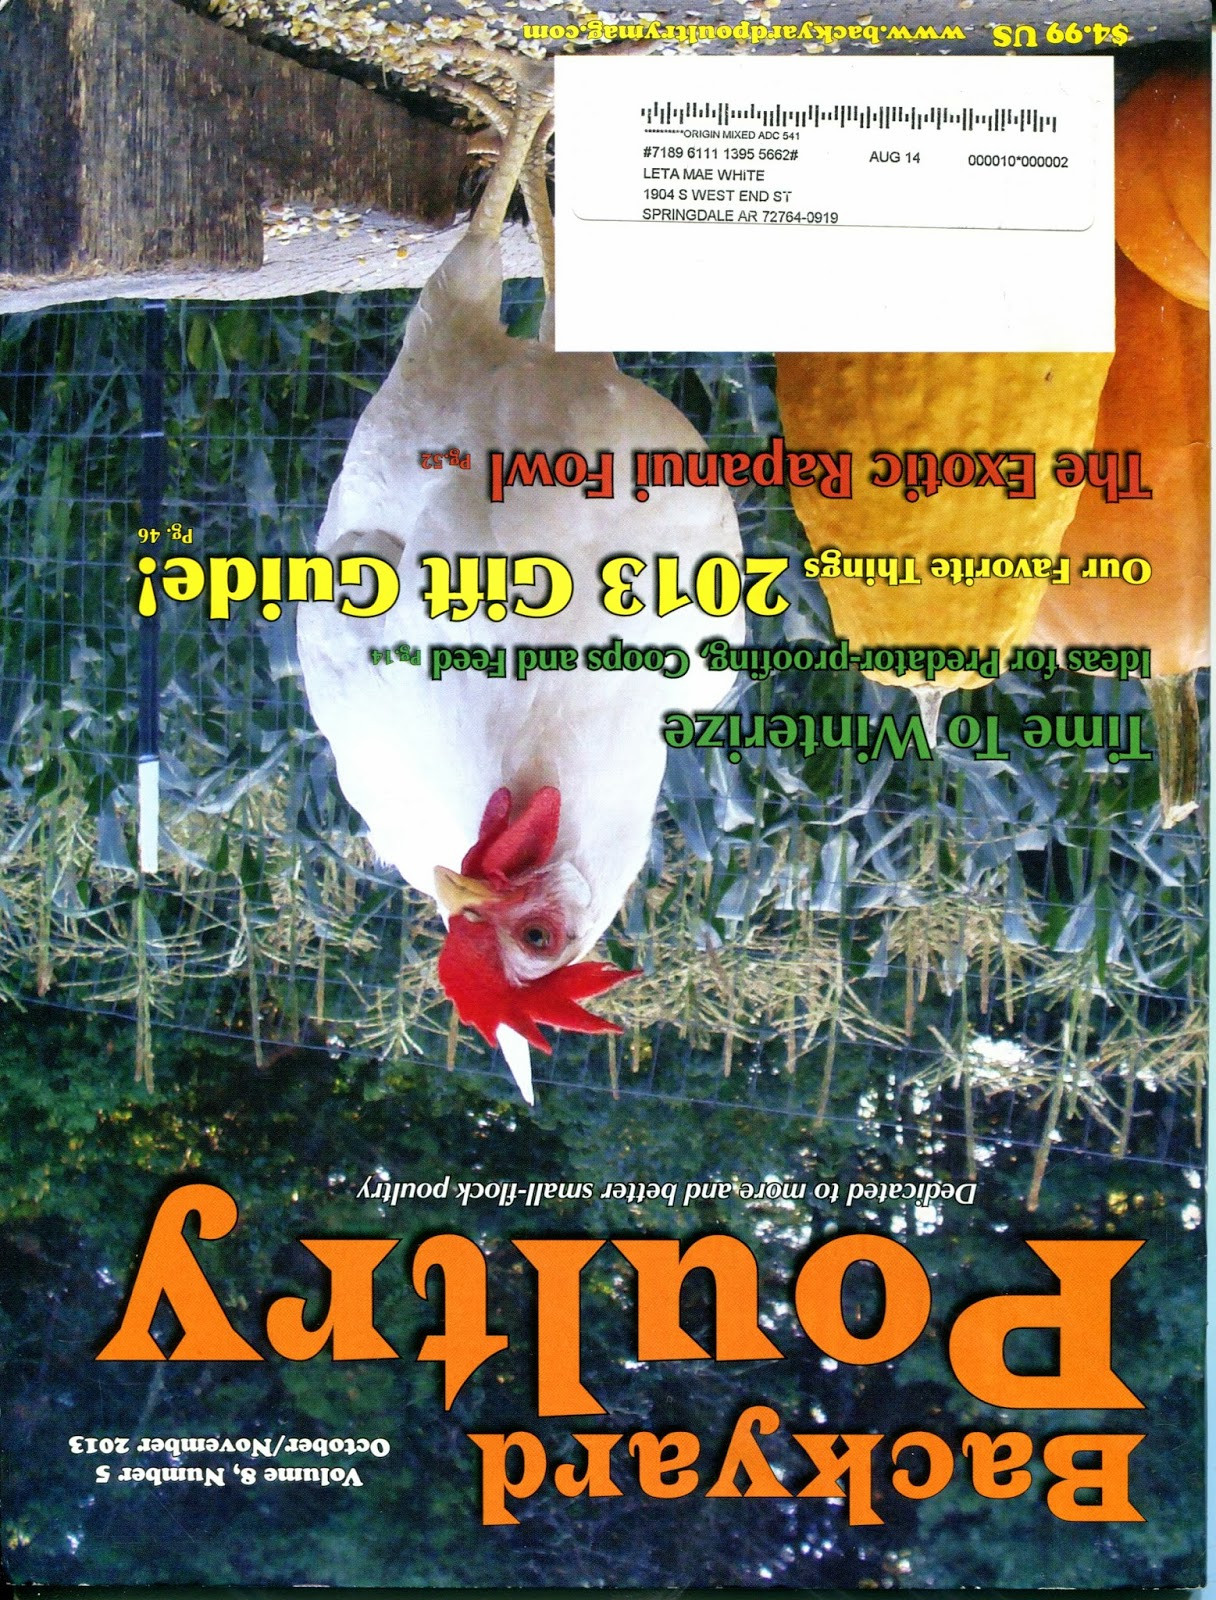 Best ideas about Backyard Poultry Magazine
. Save or Pin Rod s Duck Farm Rod s Duck Farm says Backyard Poultry Now.